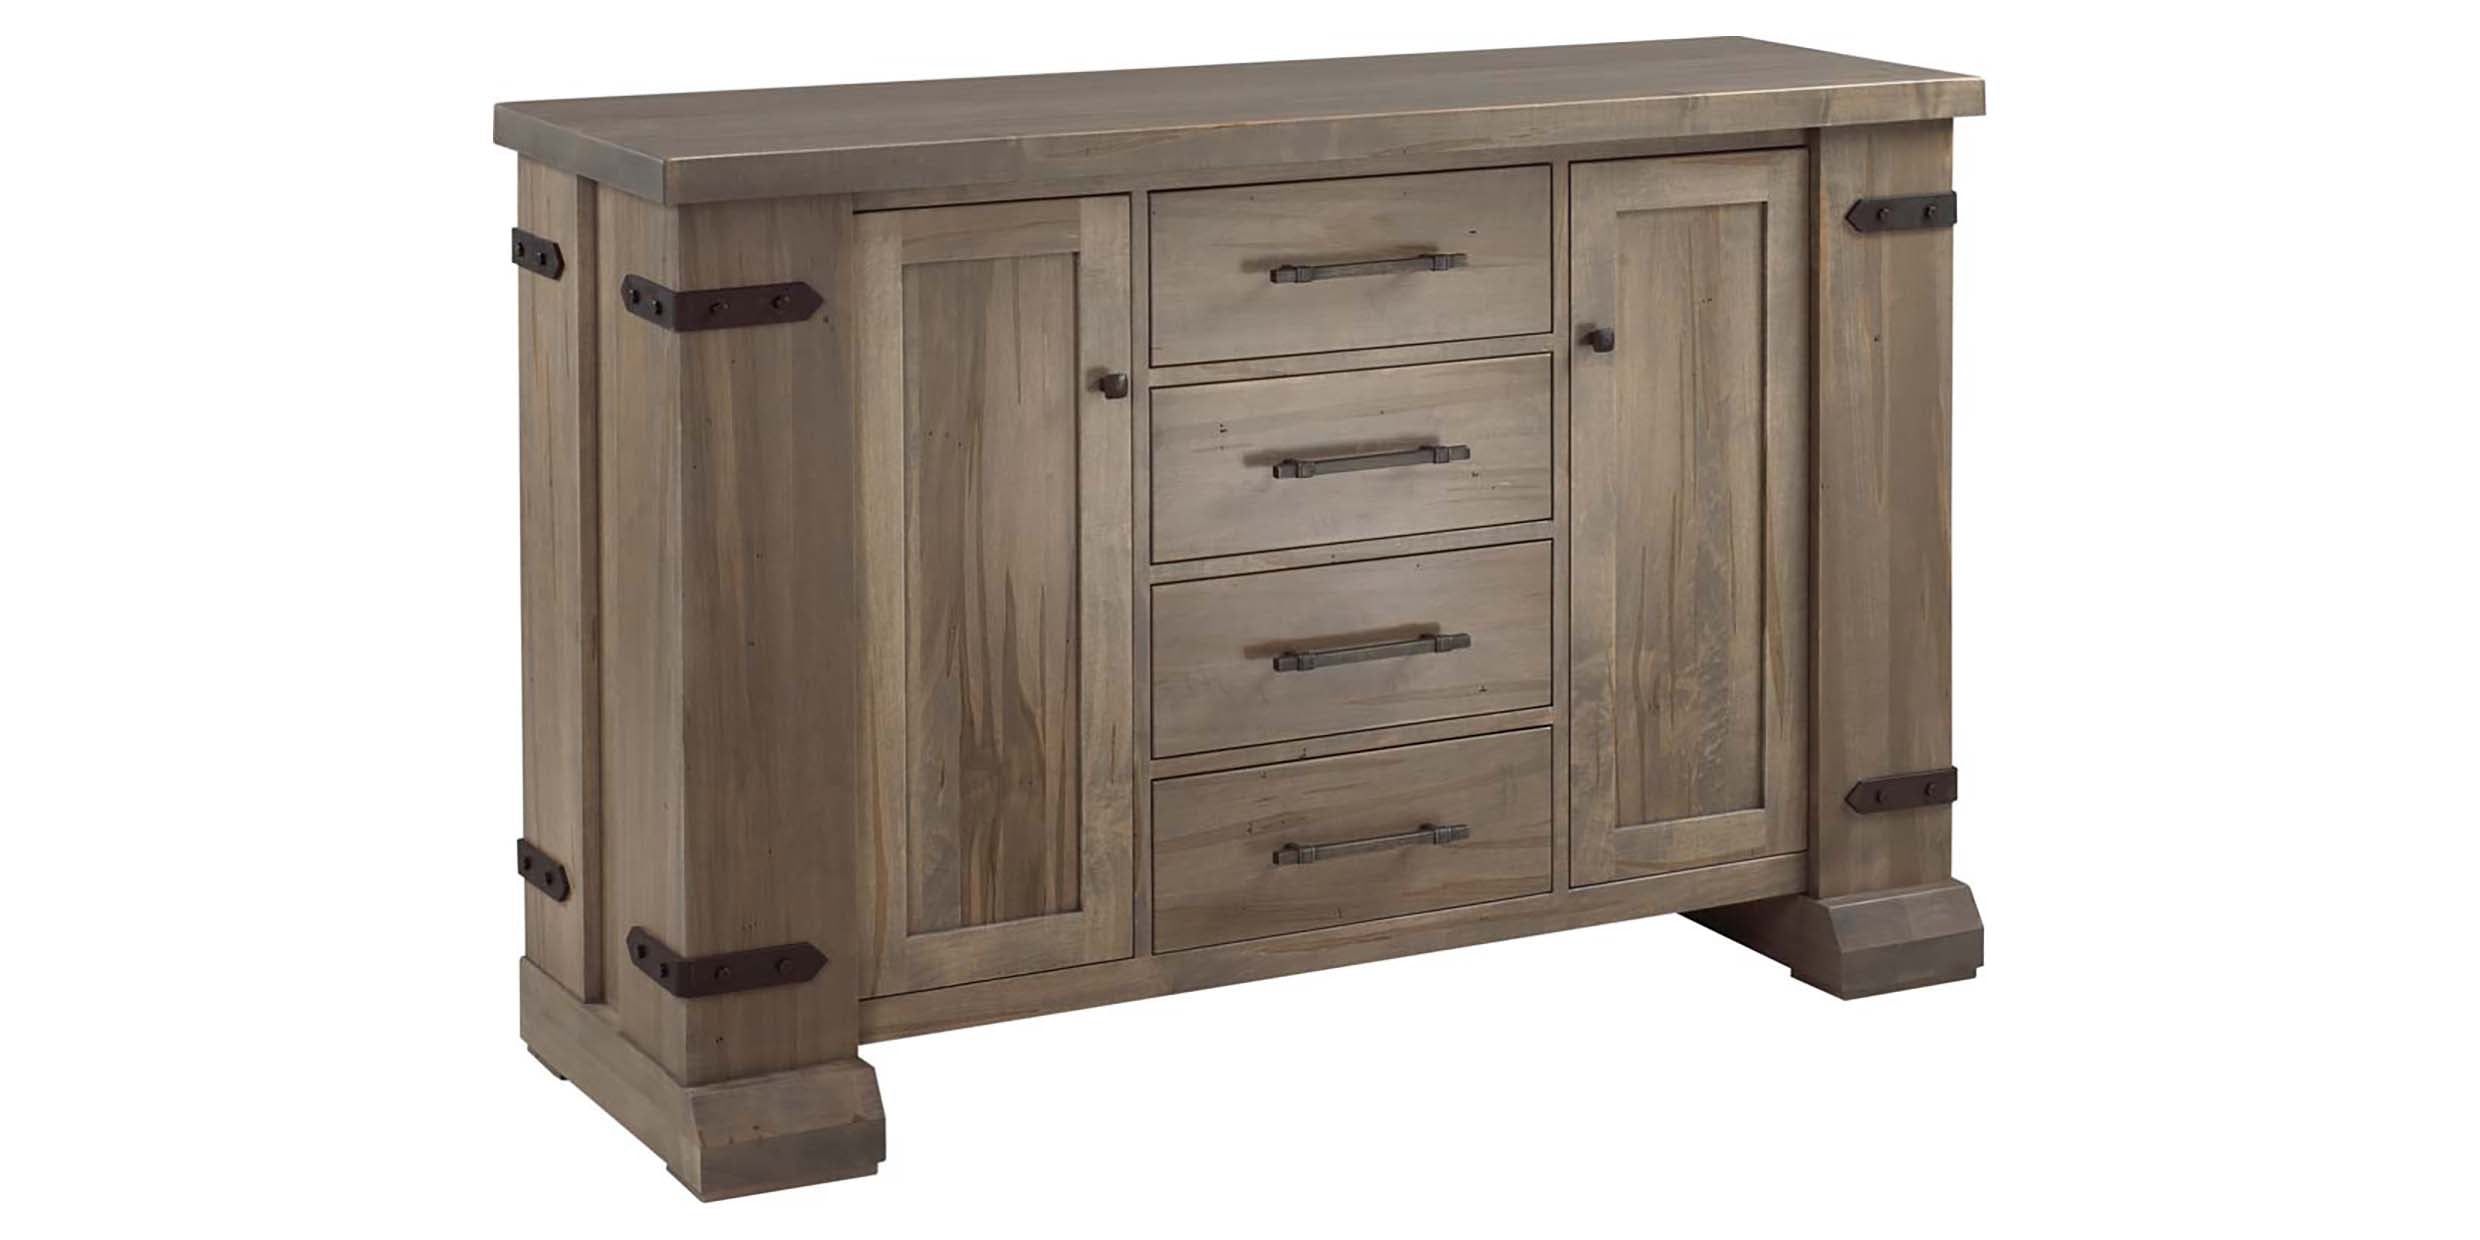 Sideboard as Shown | Cardinal Woodcraft Acton Central Sideboard | Valley Ridge Furniture